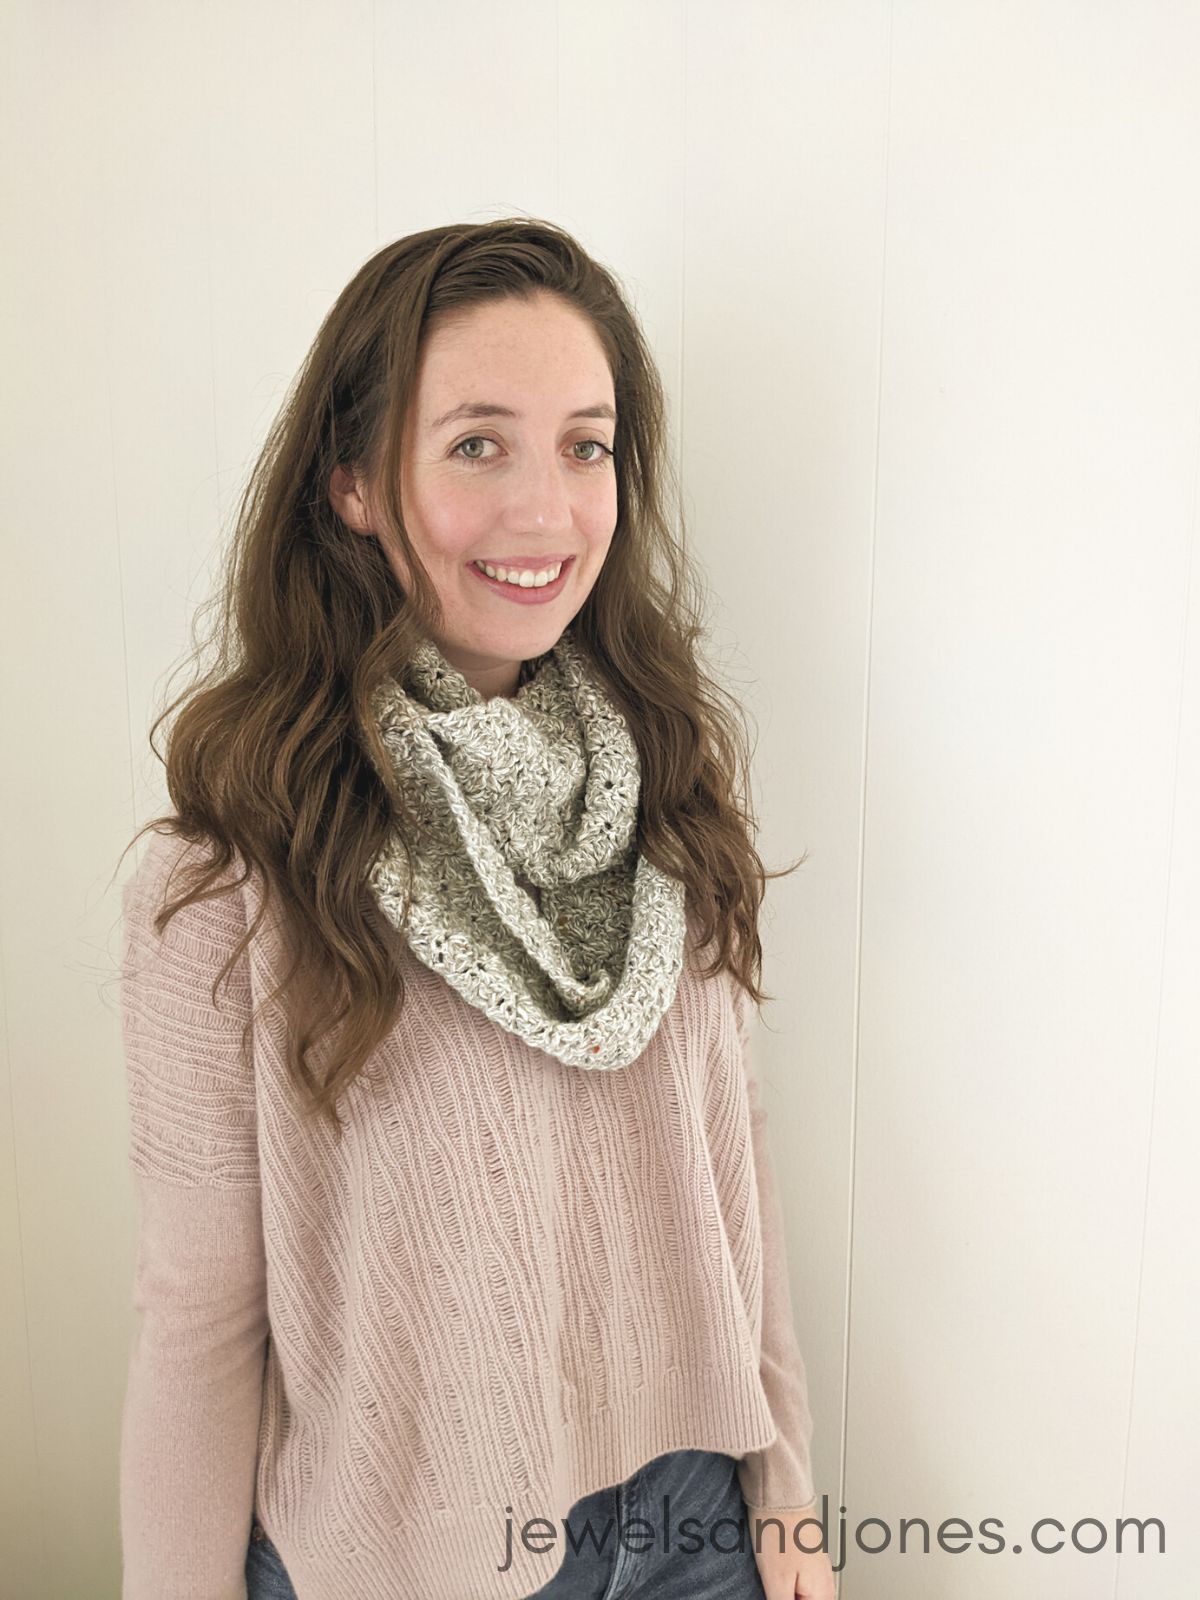 A crochet infinity scarf that's made using the shell stitch.